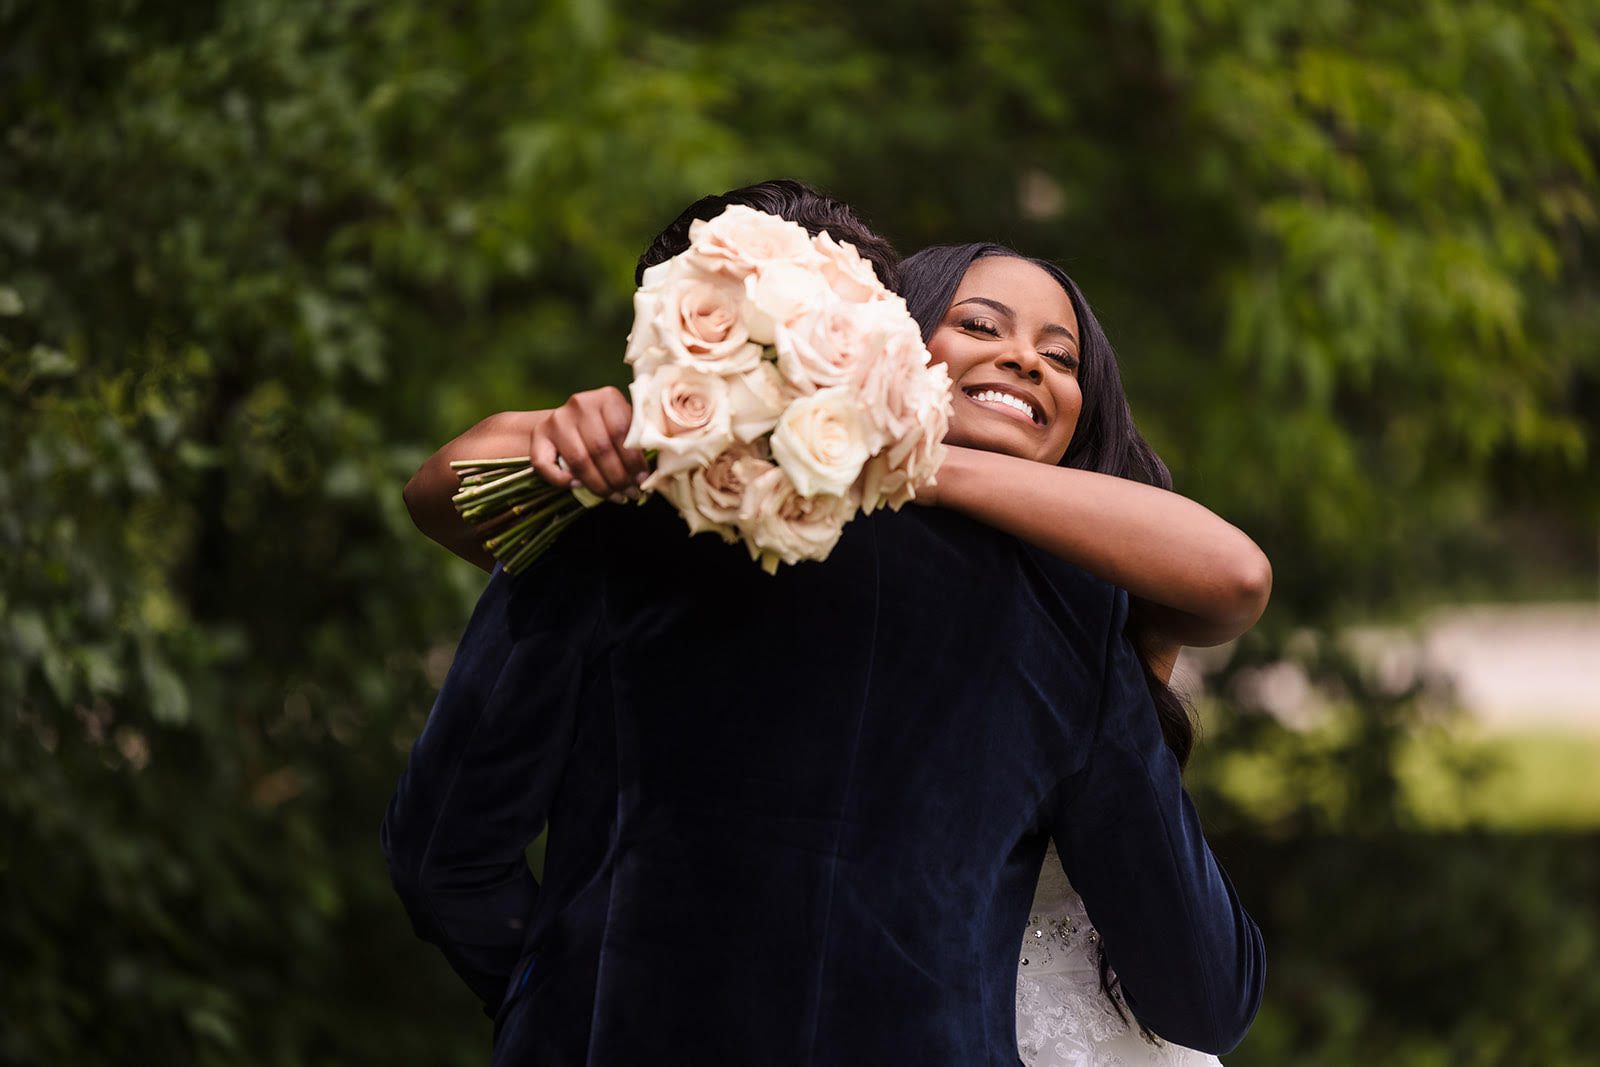 A bride and groom share an embrace in a lush green outdoor setting. The groom, facing away from the camera, holds a bouquet of white and pink roses. The bride, facing the camera and smiling broadly, leans into the hug, showing joy and happiness.